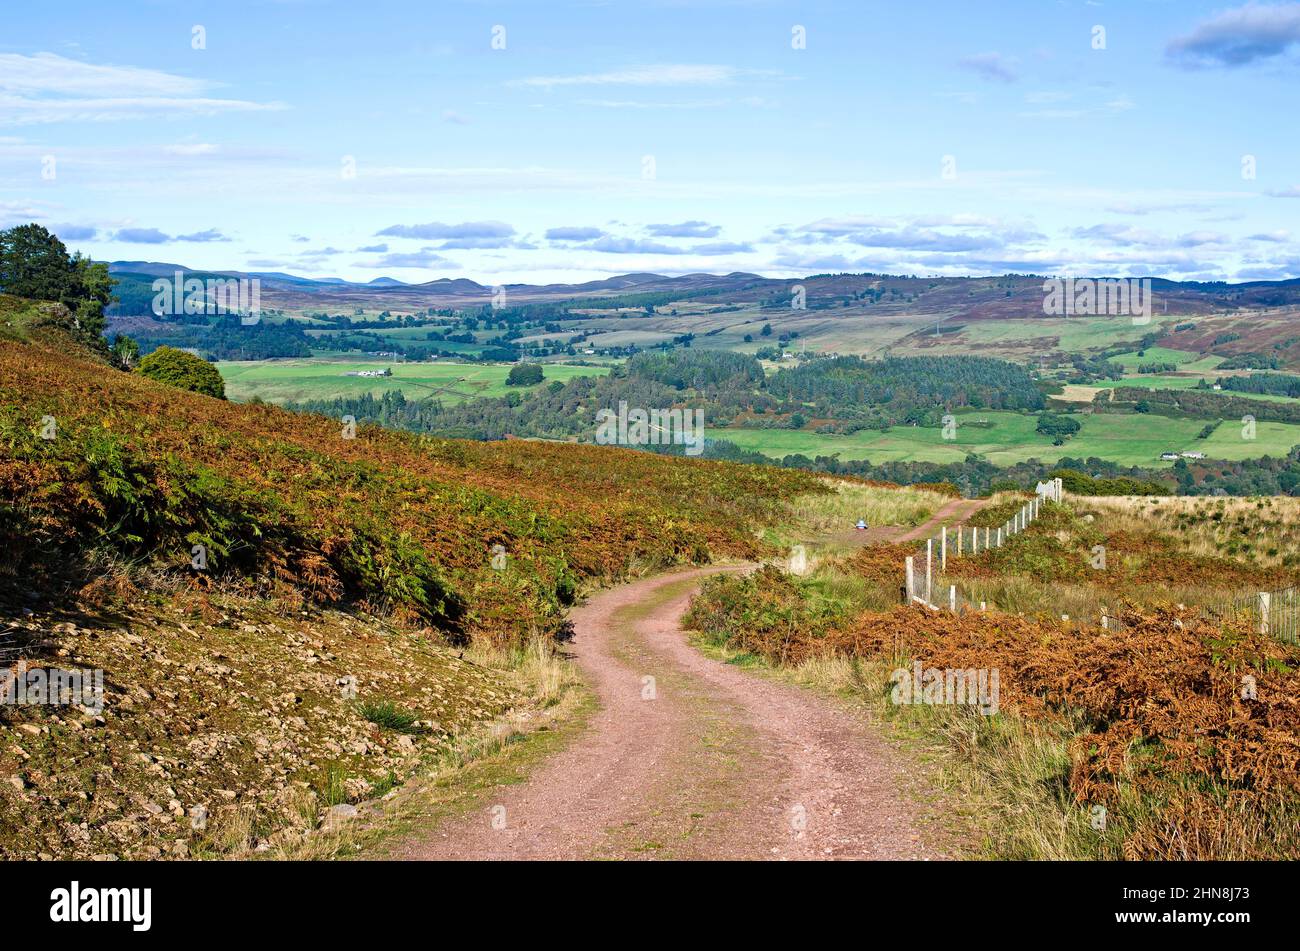 Winding moorland track on hillside above Tay valley, with high level views to hills across the valley, autumn, Tayside, Perthshire Scotland UK Stock Photo